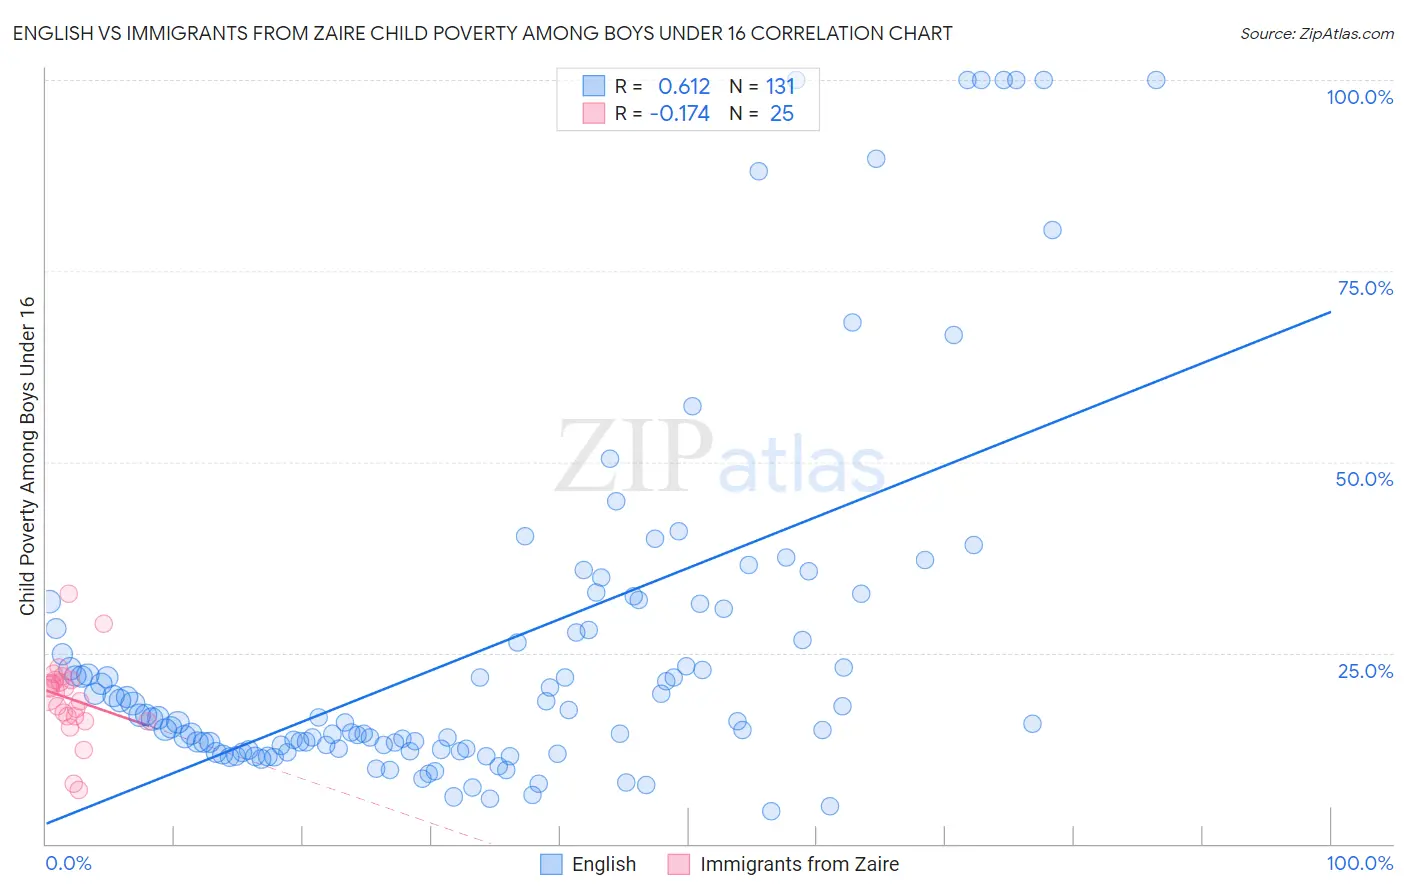 English vs Immigrants from Zaire Child Poverty Among Boys Under 16